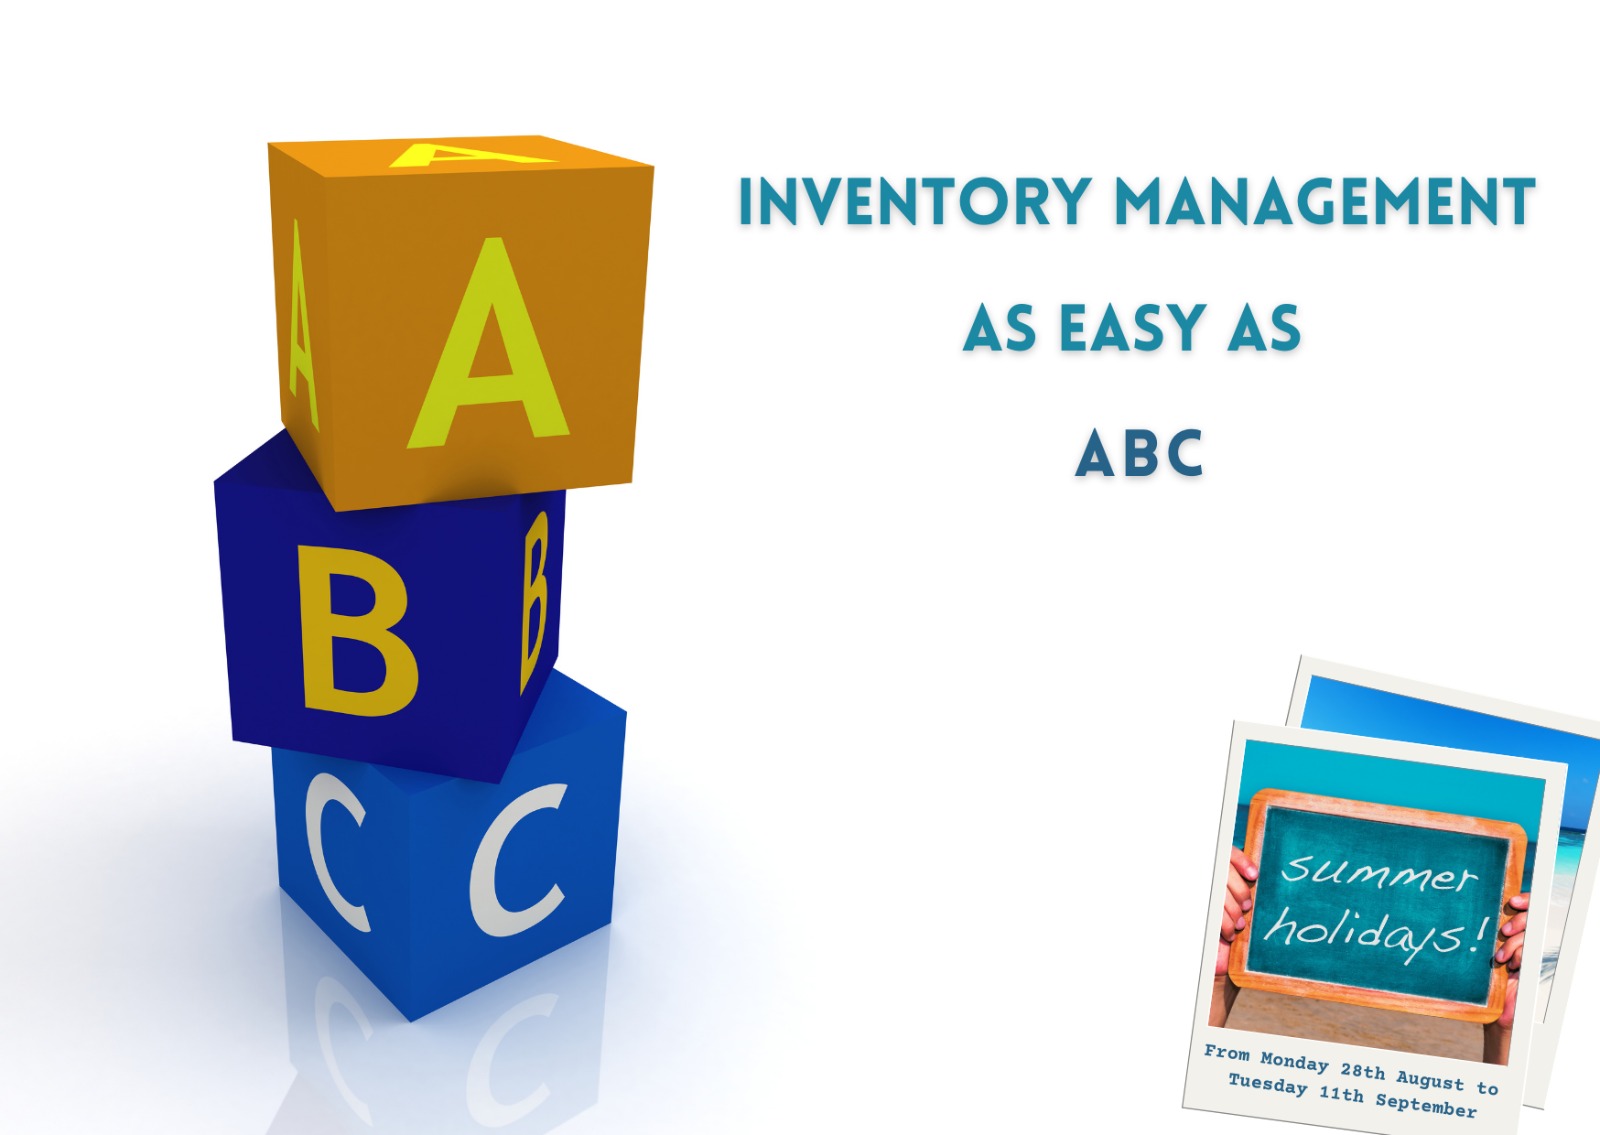 Inventory Management as easy as ABC